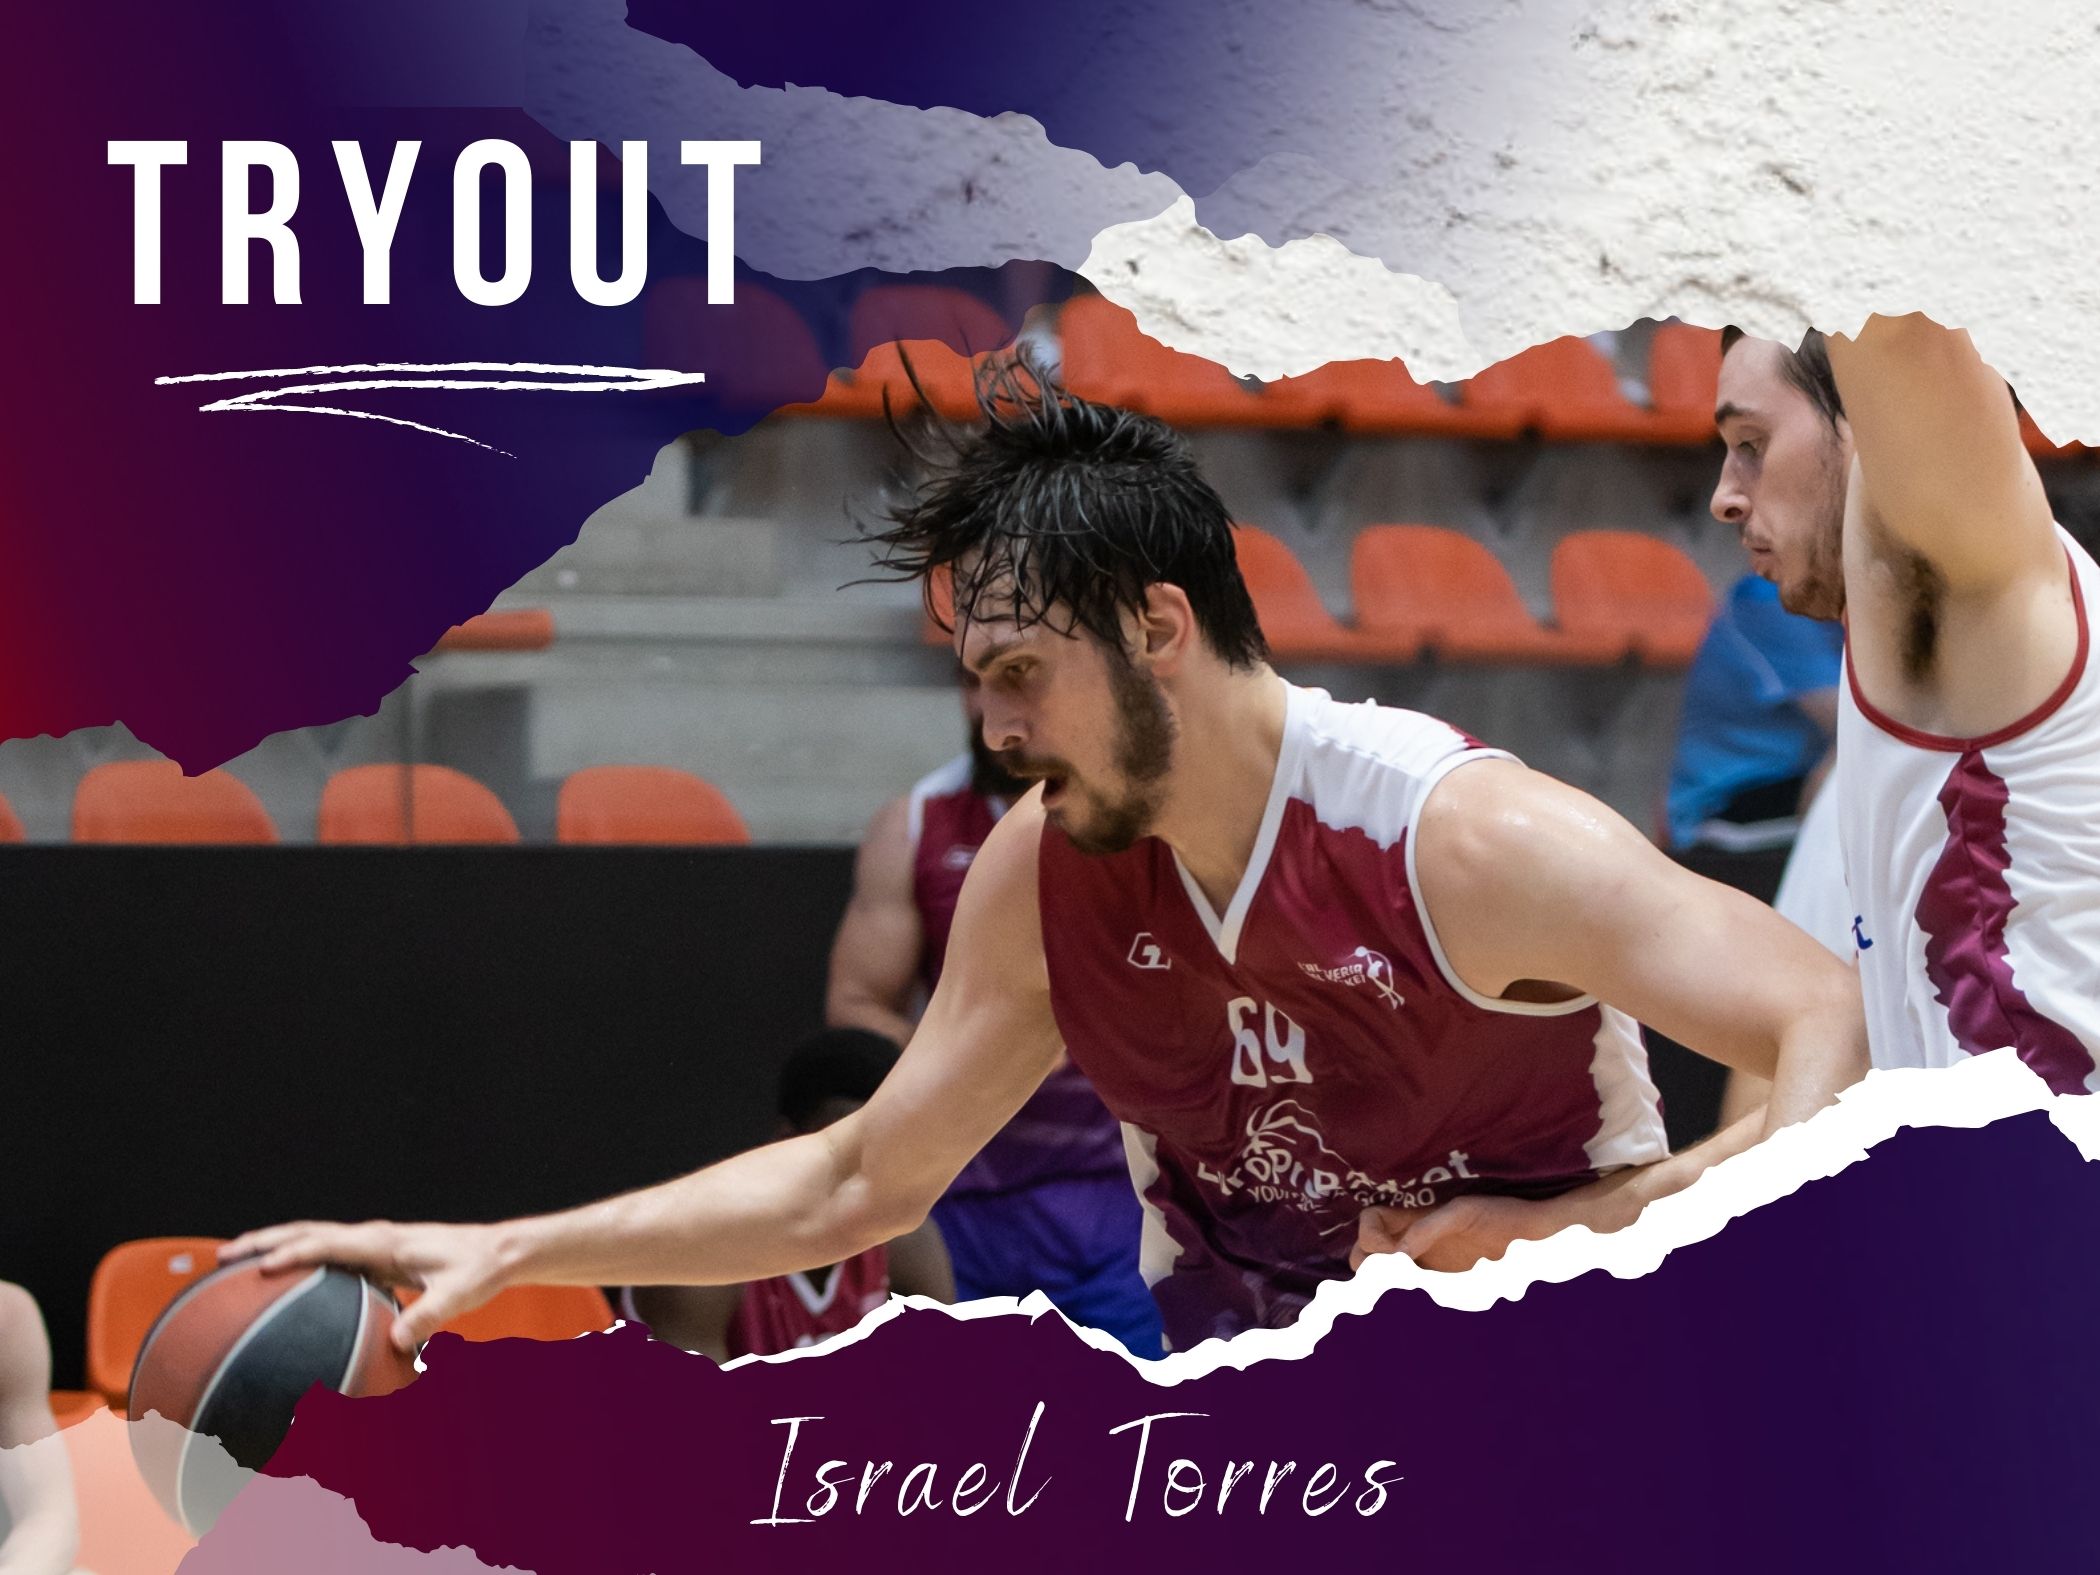 European Summer League Player on Tryout in Valencia, Spain